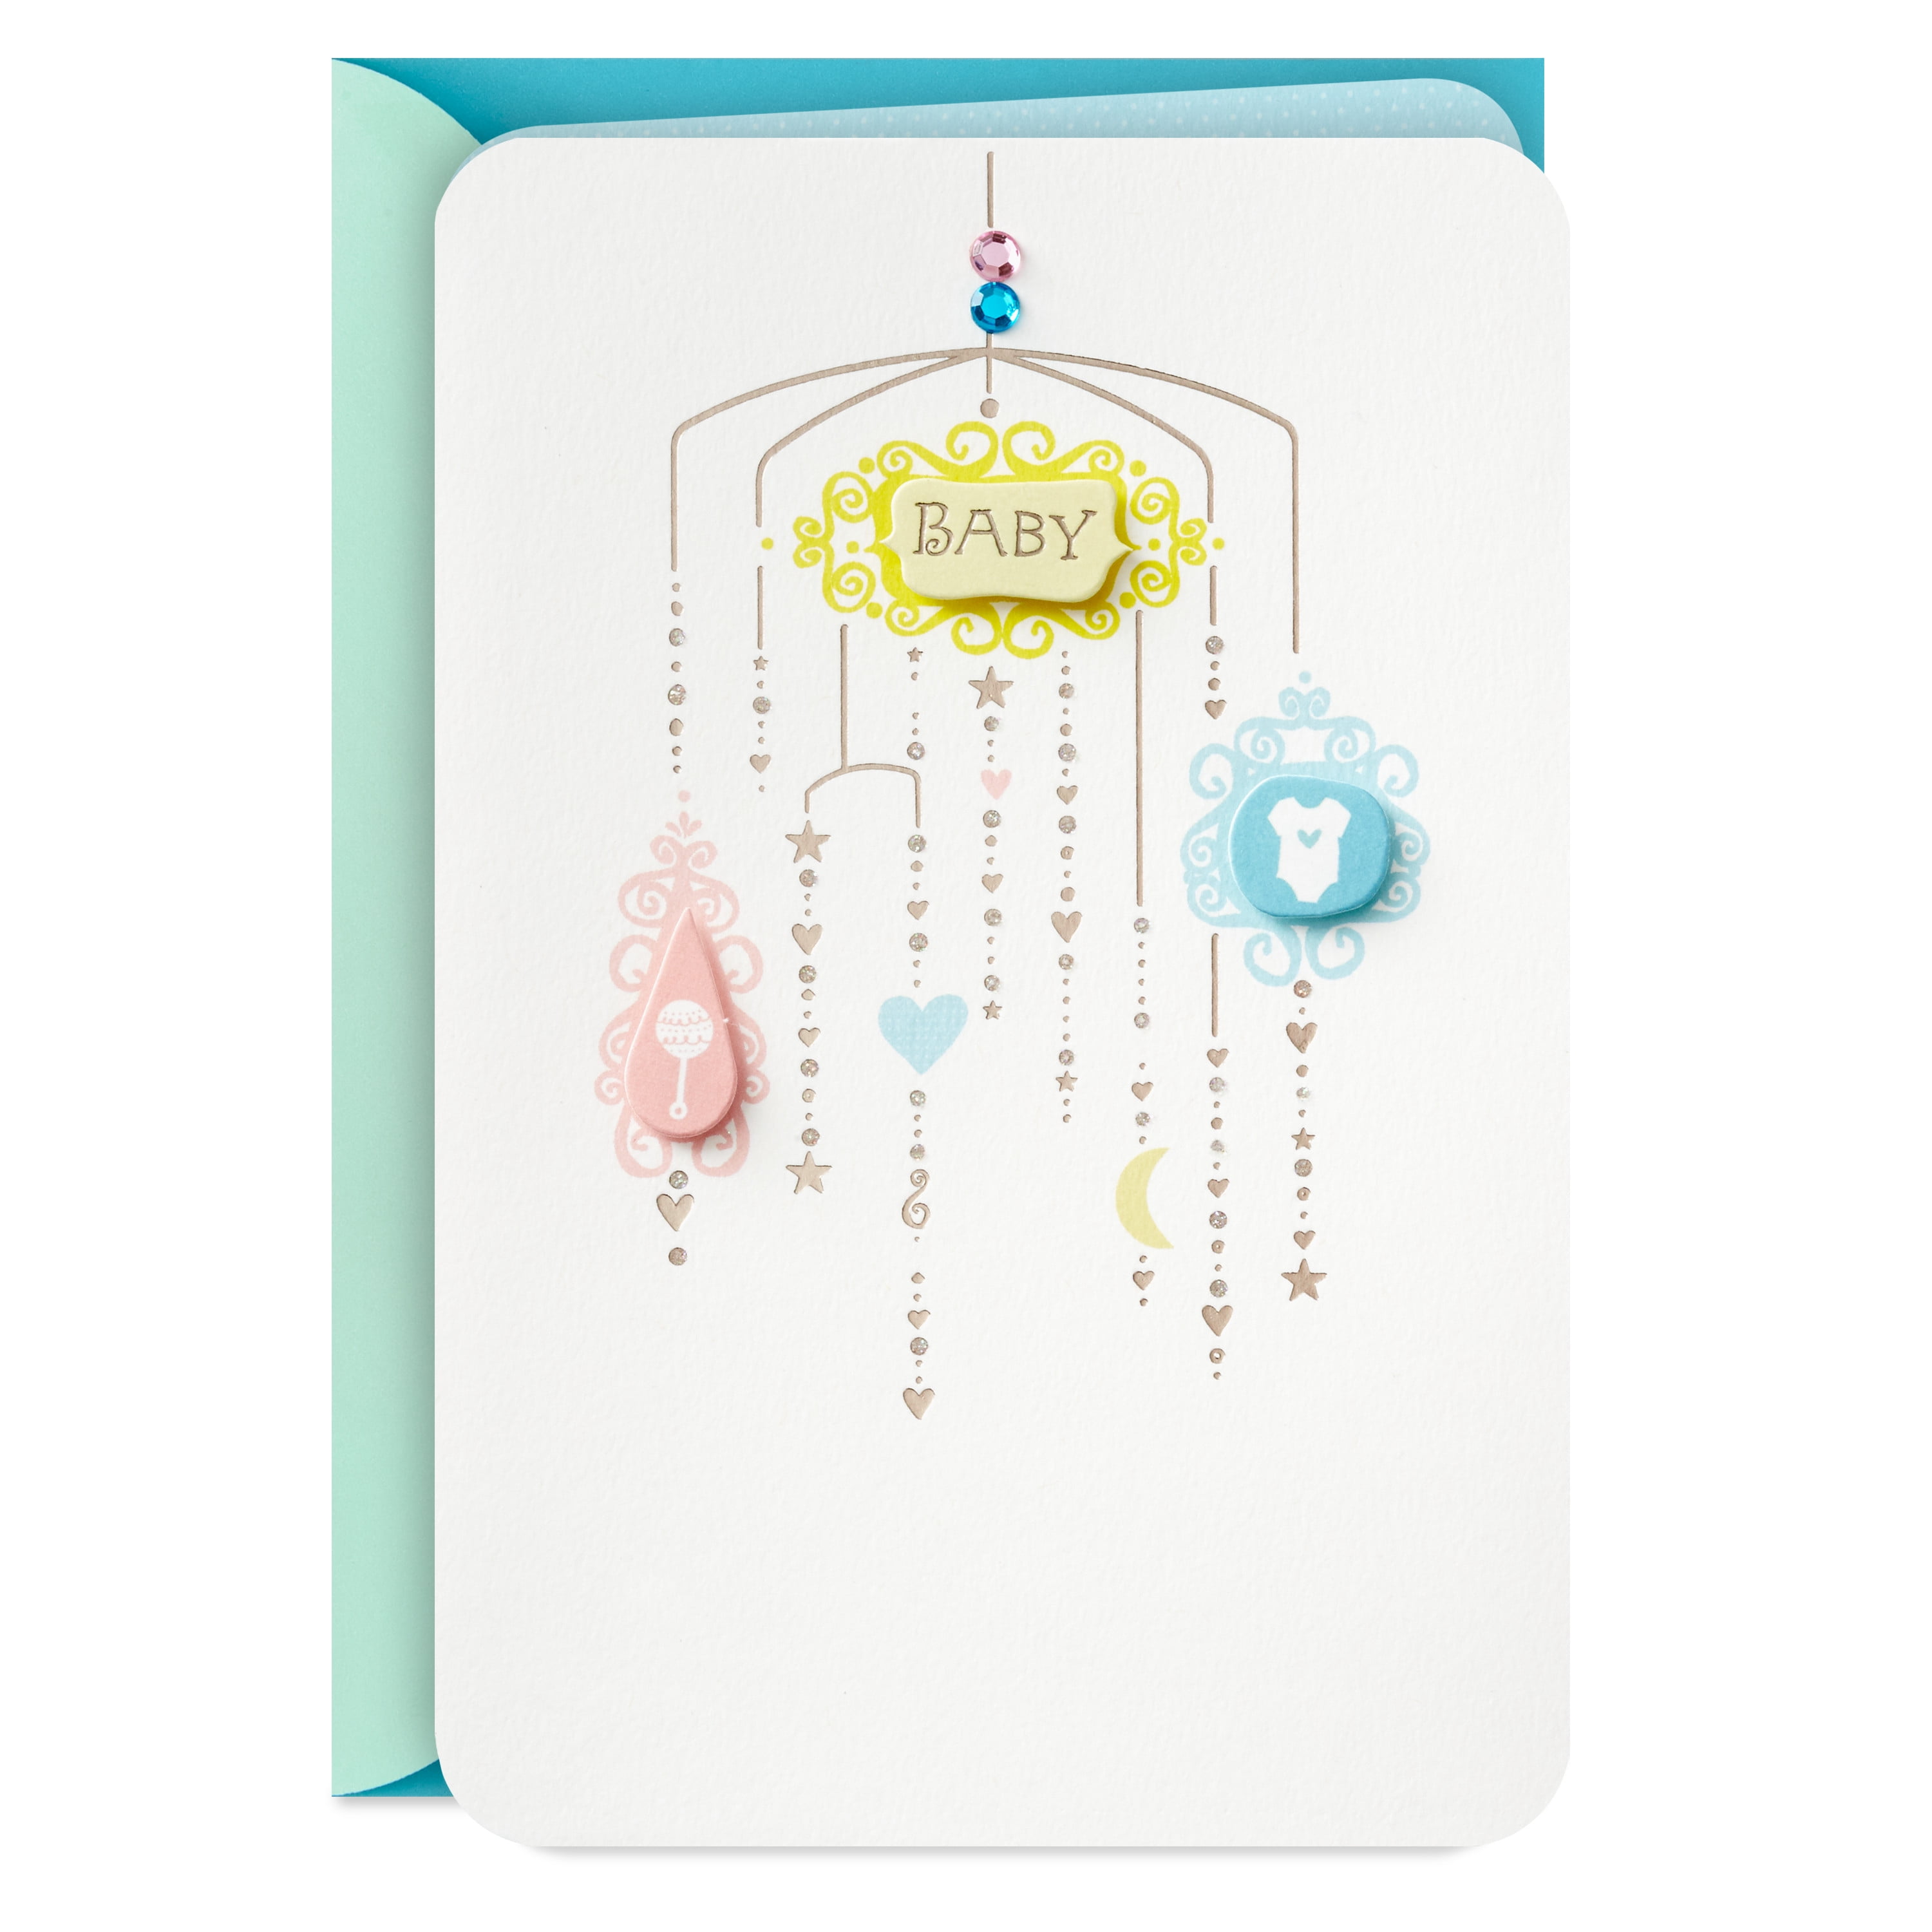 New Hallmark Card Making Kit  10 cards Personalized Greeting Note 